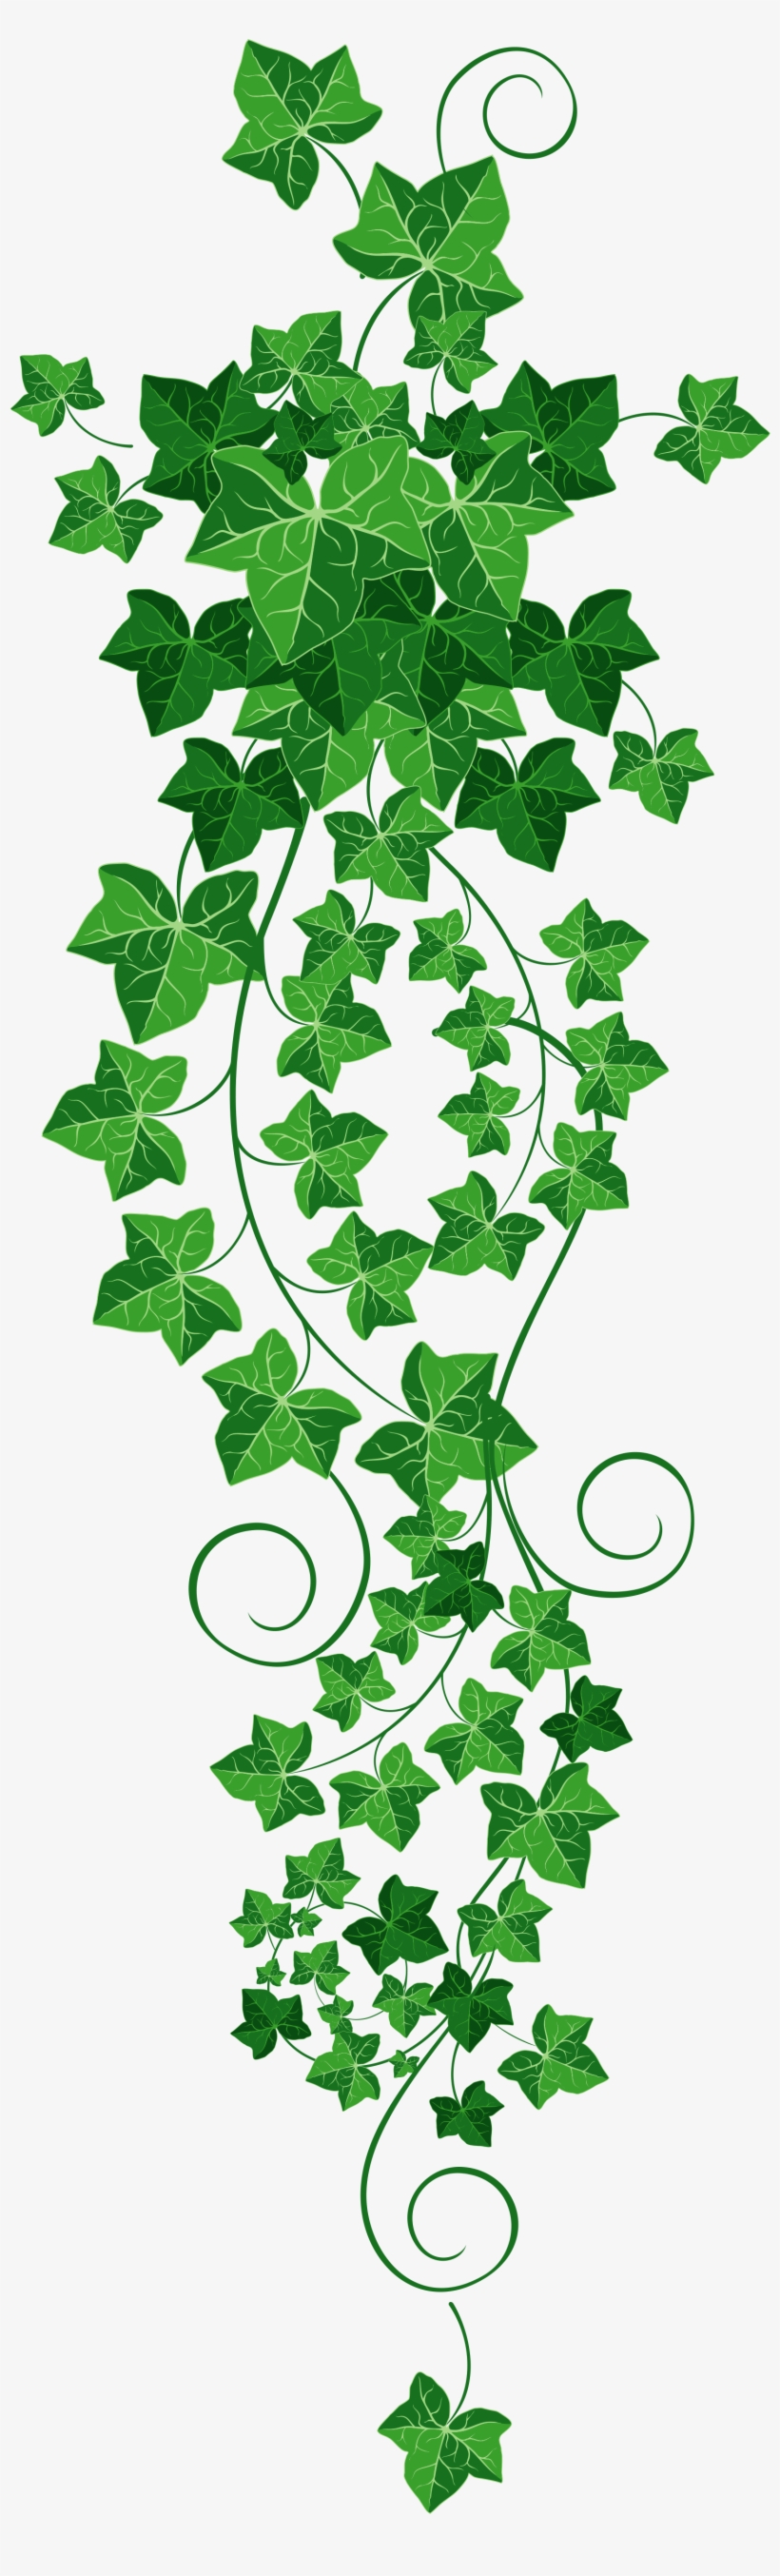 Free Clipart Of An ivy border - Clip Art Library